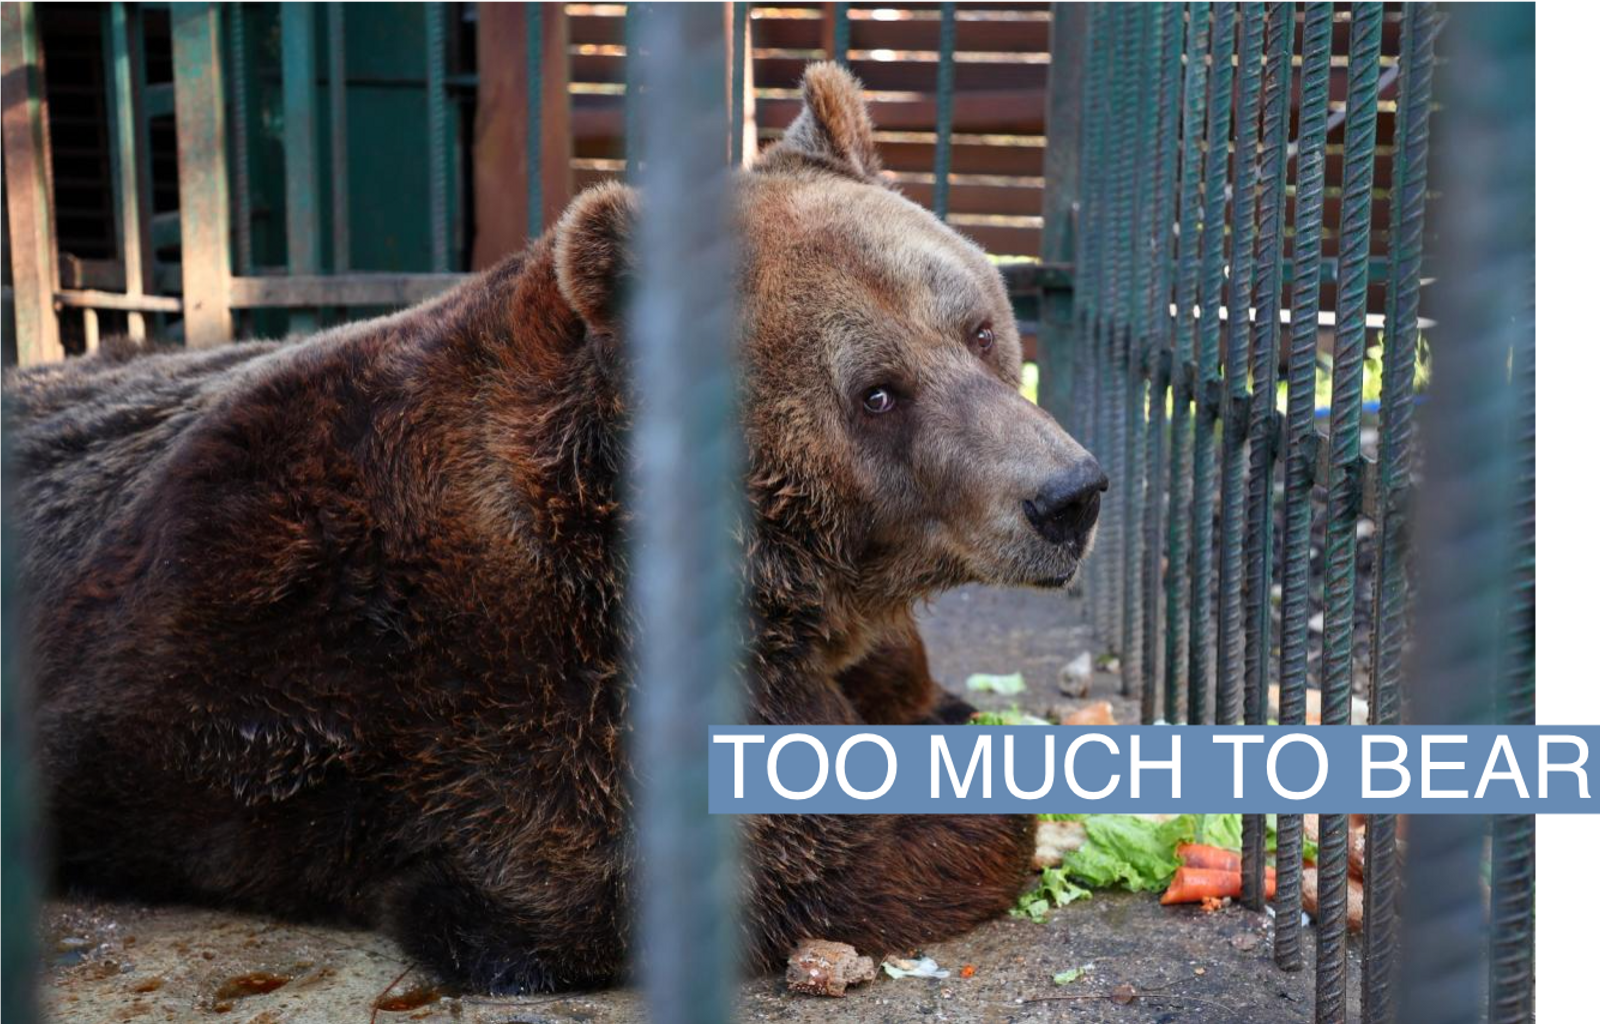 Mark, a 24 year old brown bear sits inside a cage in a restaurant in Tirana, Albania, December 5, 2022.